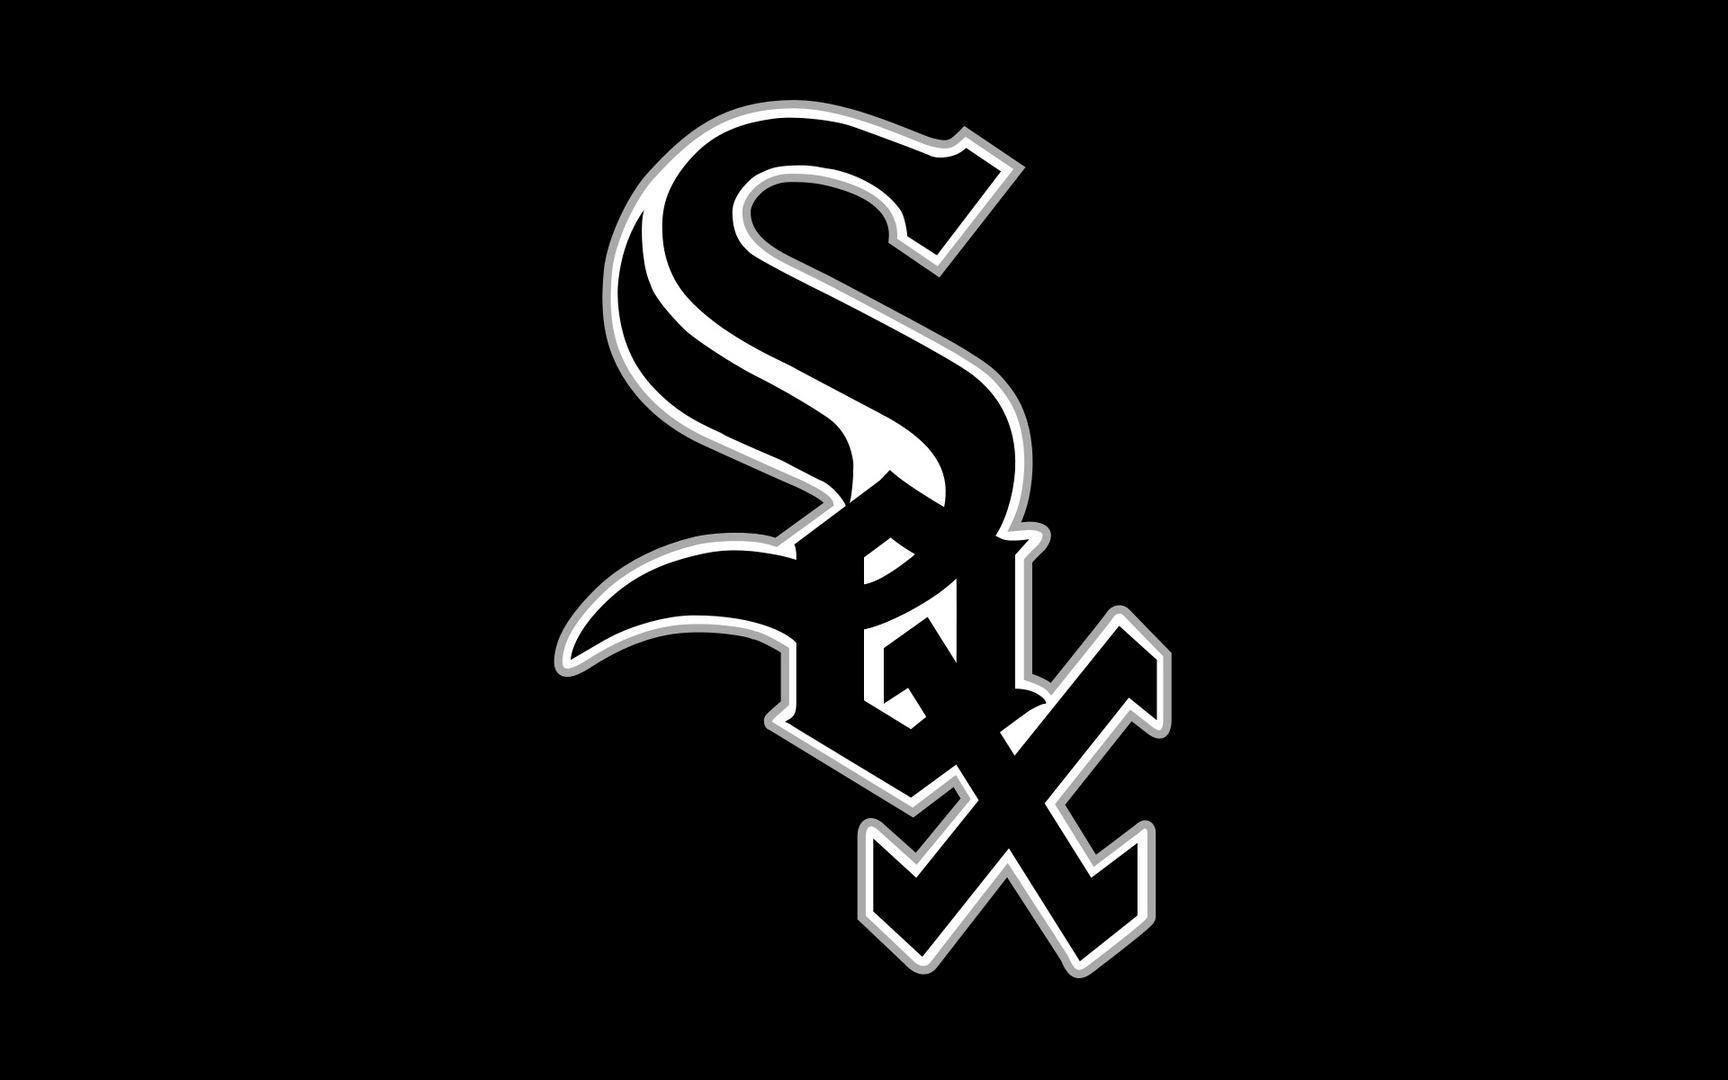 Chicago White Sox wallpaper HD free download